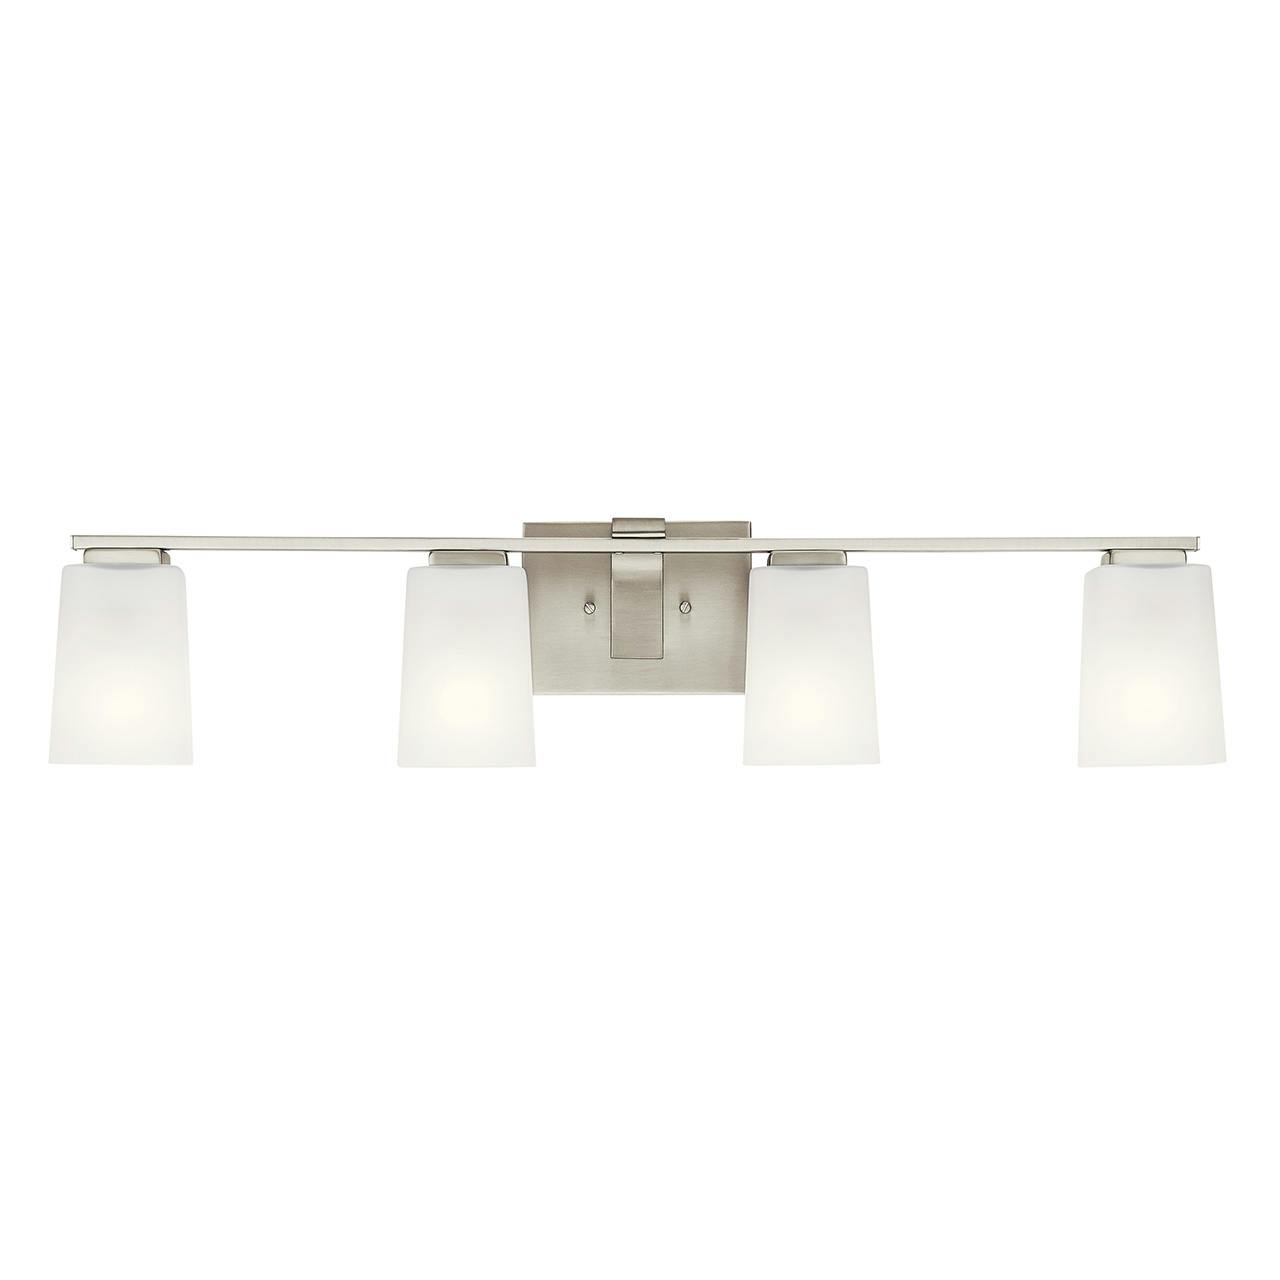 The Roehm 4 Light Vanity Light Brushed Nickel facing down on a white background